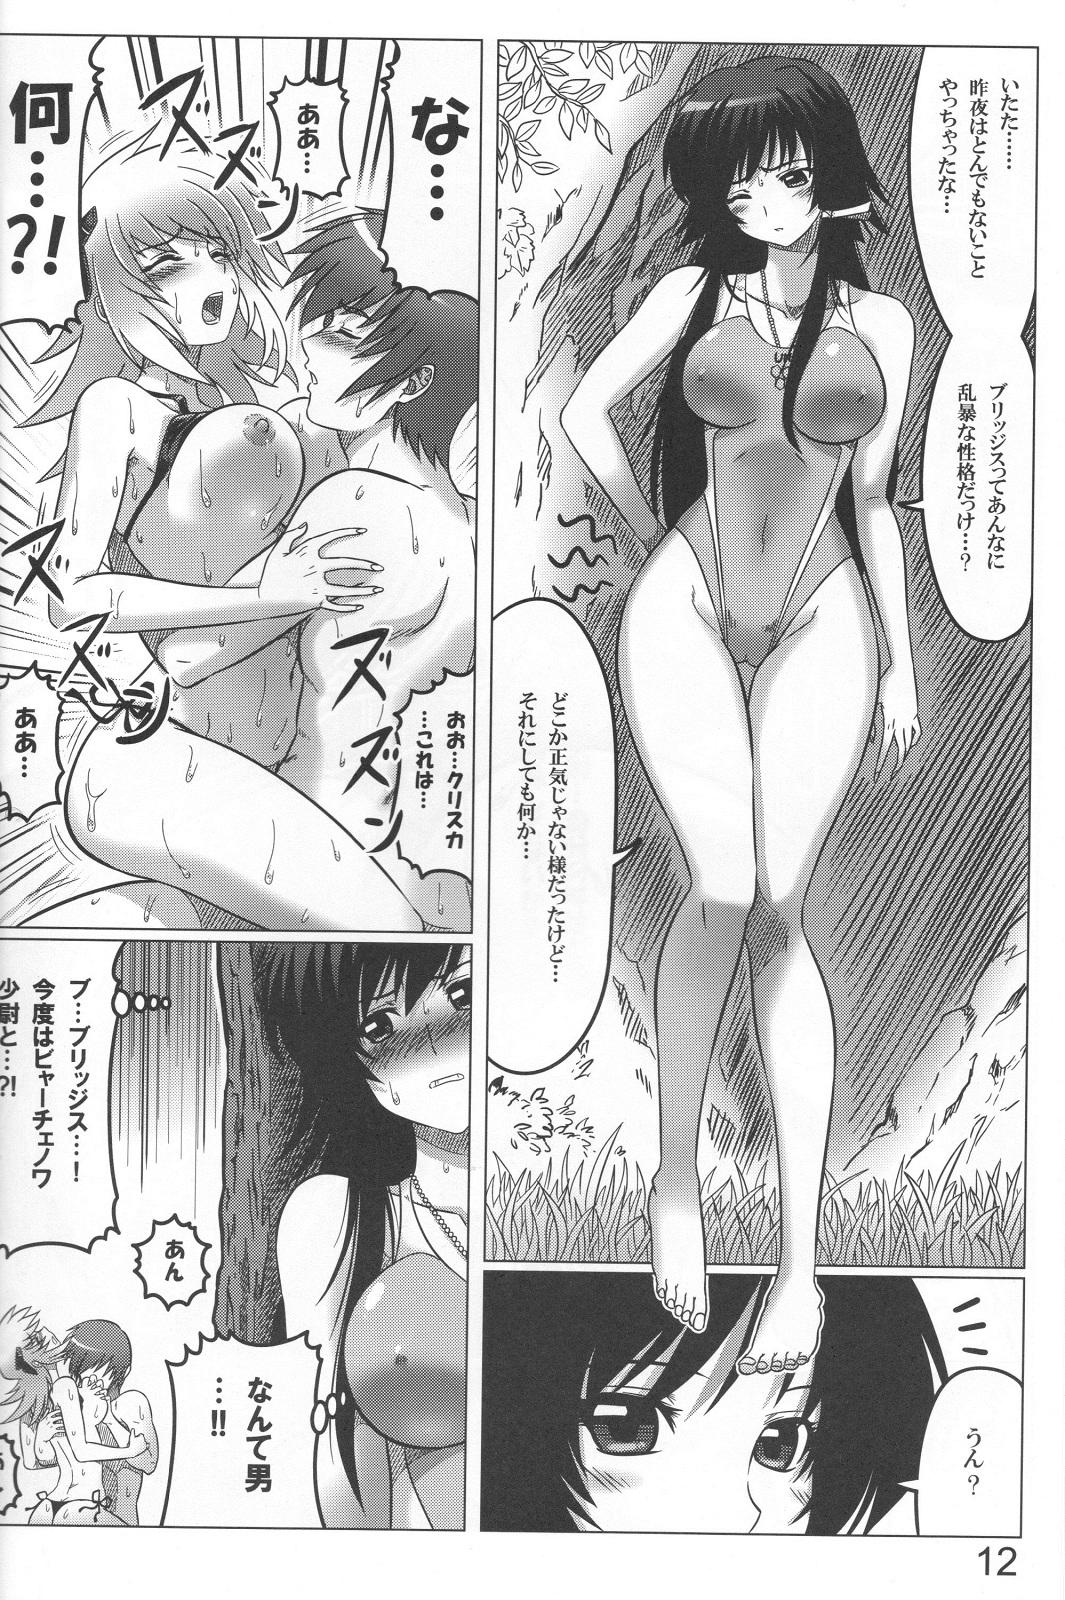 Solo Girl Intermission H - Muv luv alternative total eclipse Guys - Page 12